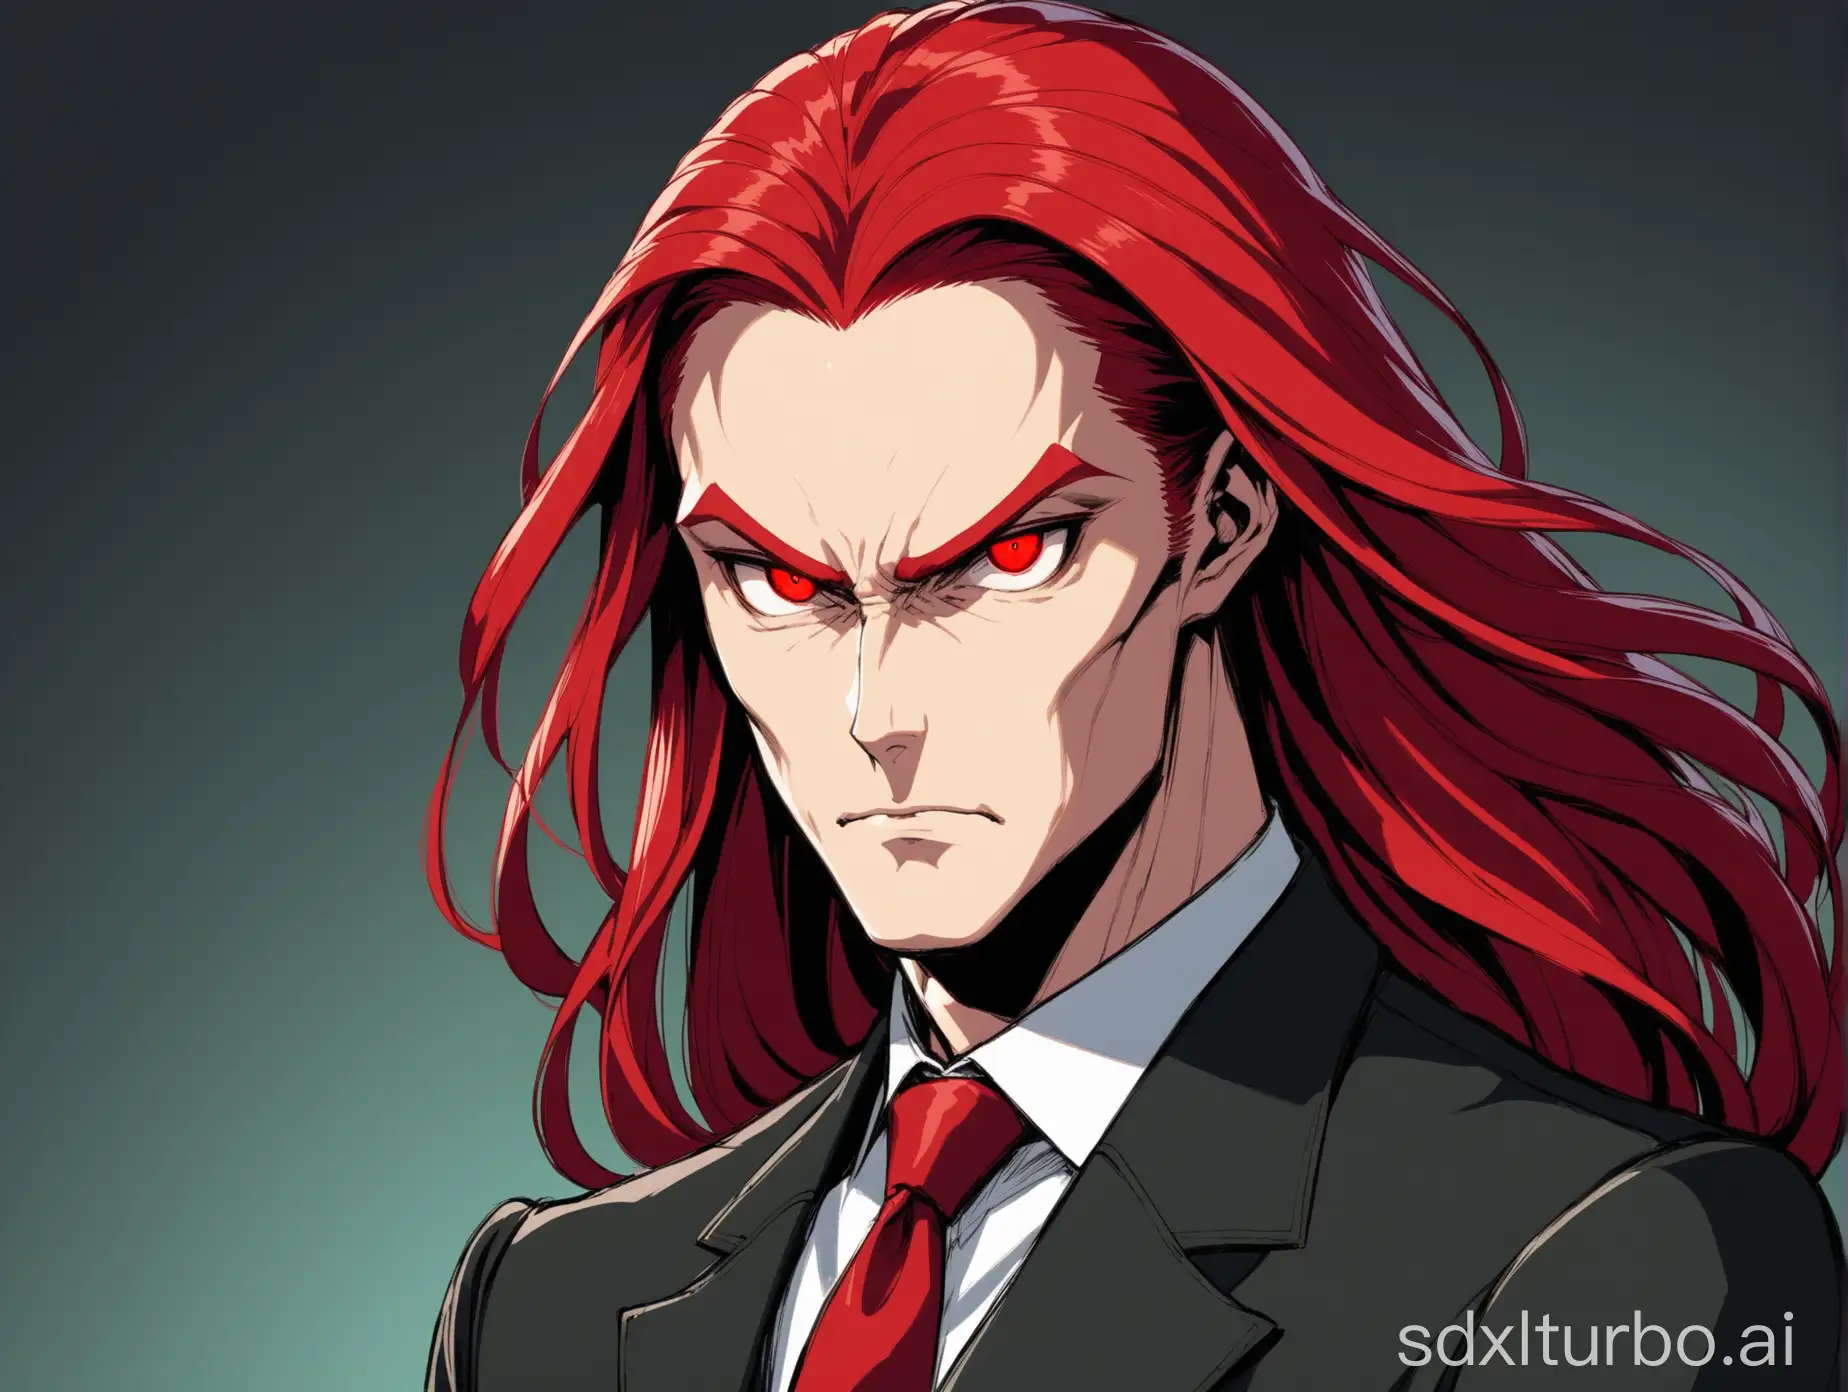 A man 40 years old, red hair down to the shoulders, wavy hair, muing, large cheekbones, very narrow eyes, narrow eyes, villain, in a black suit with a tie, thick red eyebrows, long hair, smooth forehead, elongated face, long face, luxurious hair, evil eyes, eyes slanted inward, stern look, glance from under the brow, wide cheekbones, very small eyes, serpentine gaze